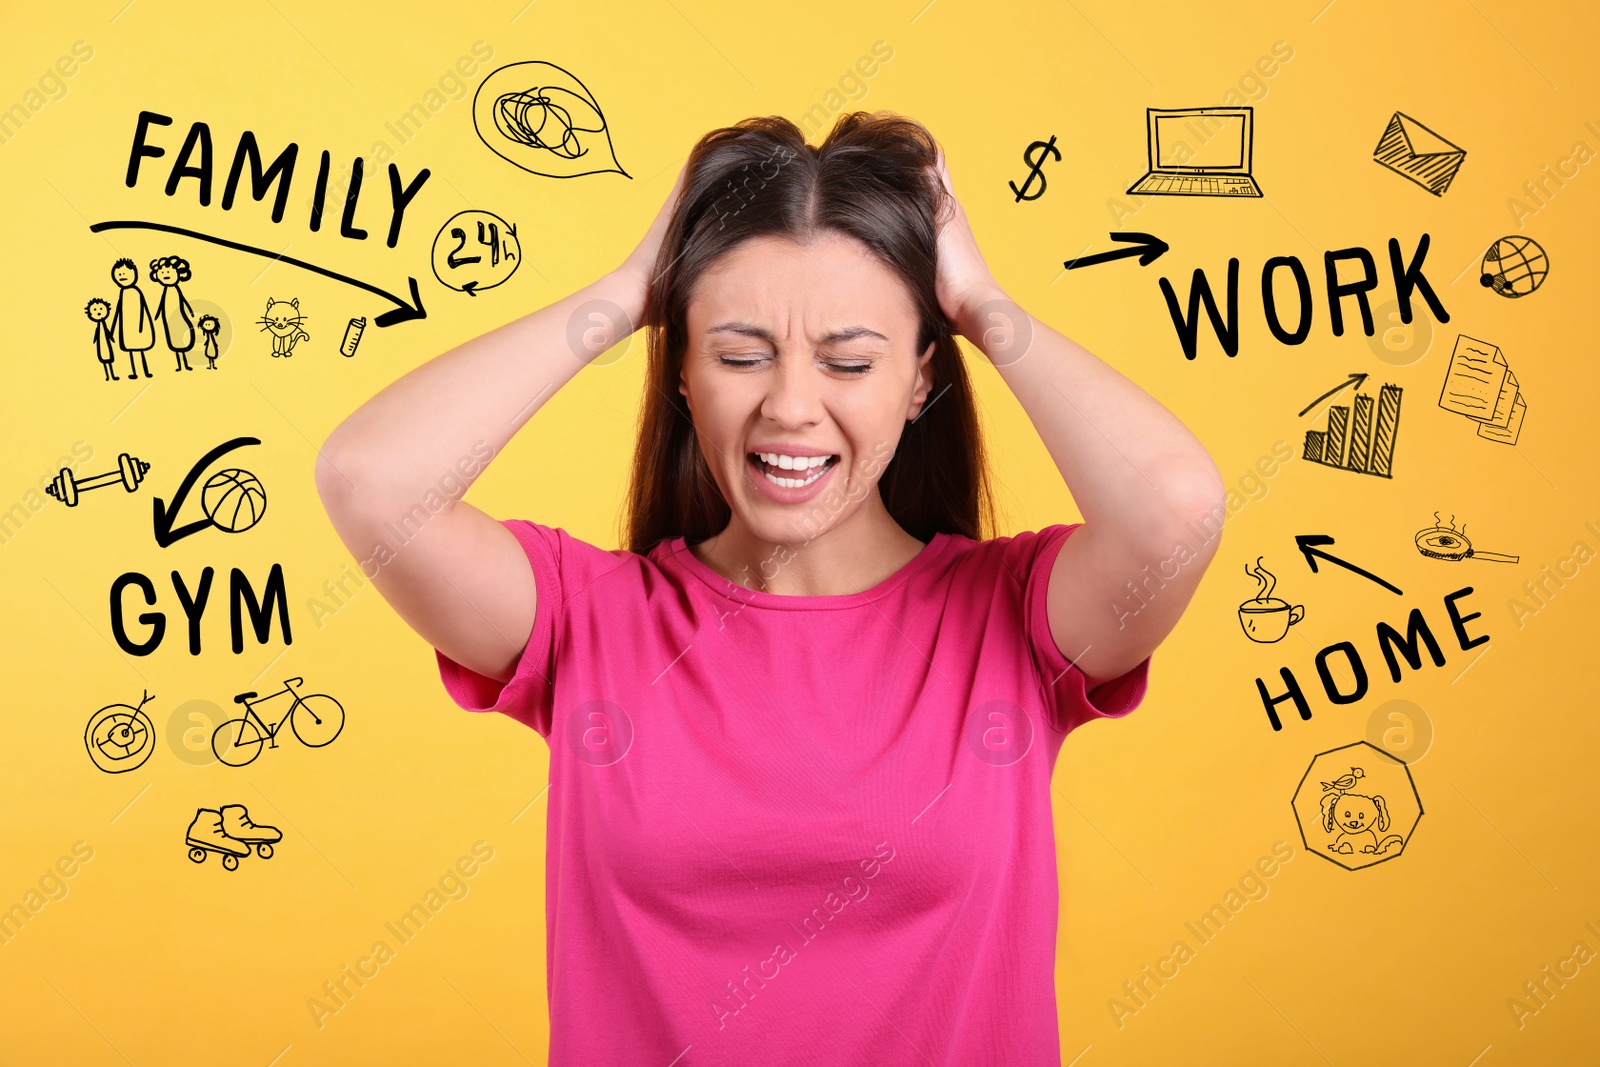 Image of Stressed young woman, text and drawings on yellow background